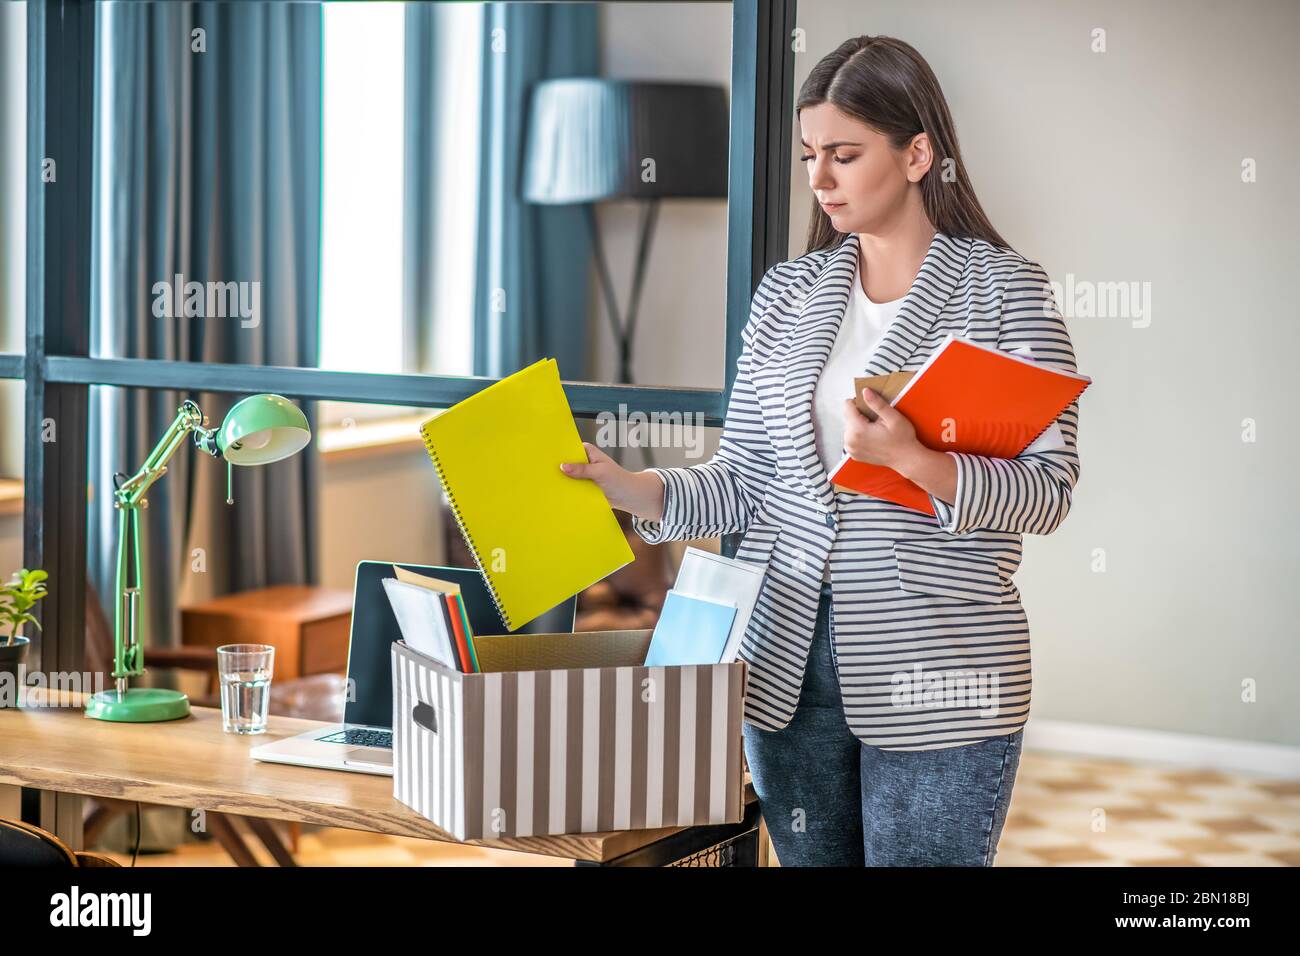 Young woman in a striped jacket standing with files in her hands Stock Photo